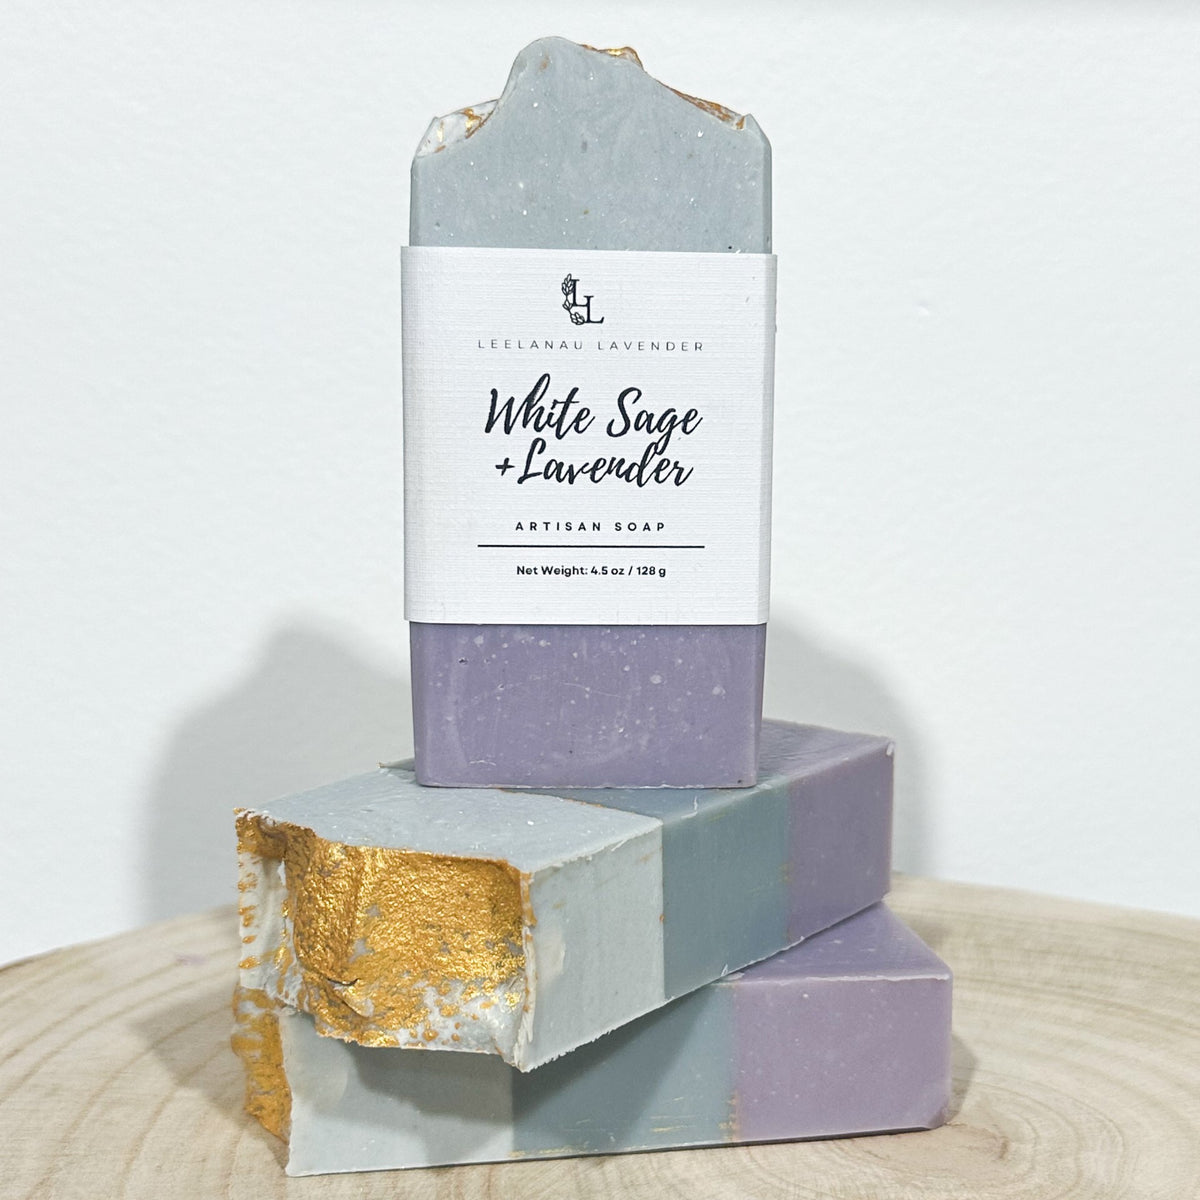 White Lily and Lavender soap, beautiful shades of blue and purple